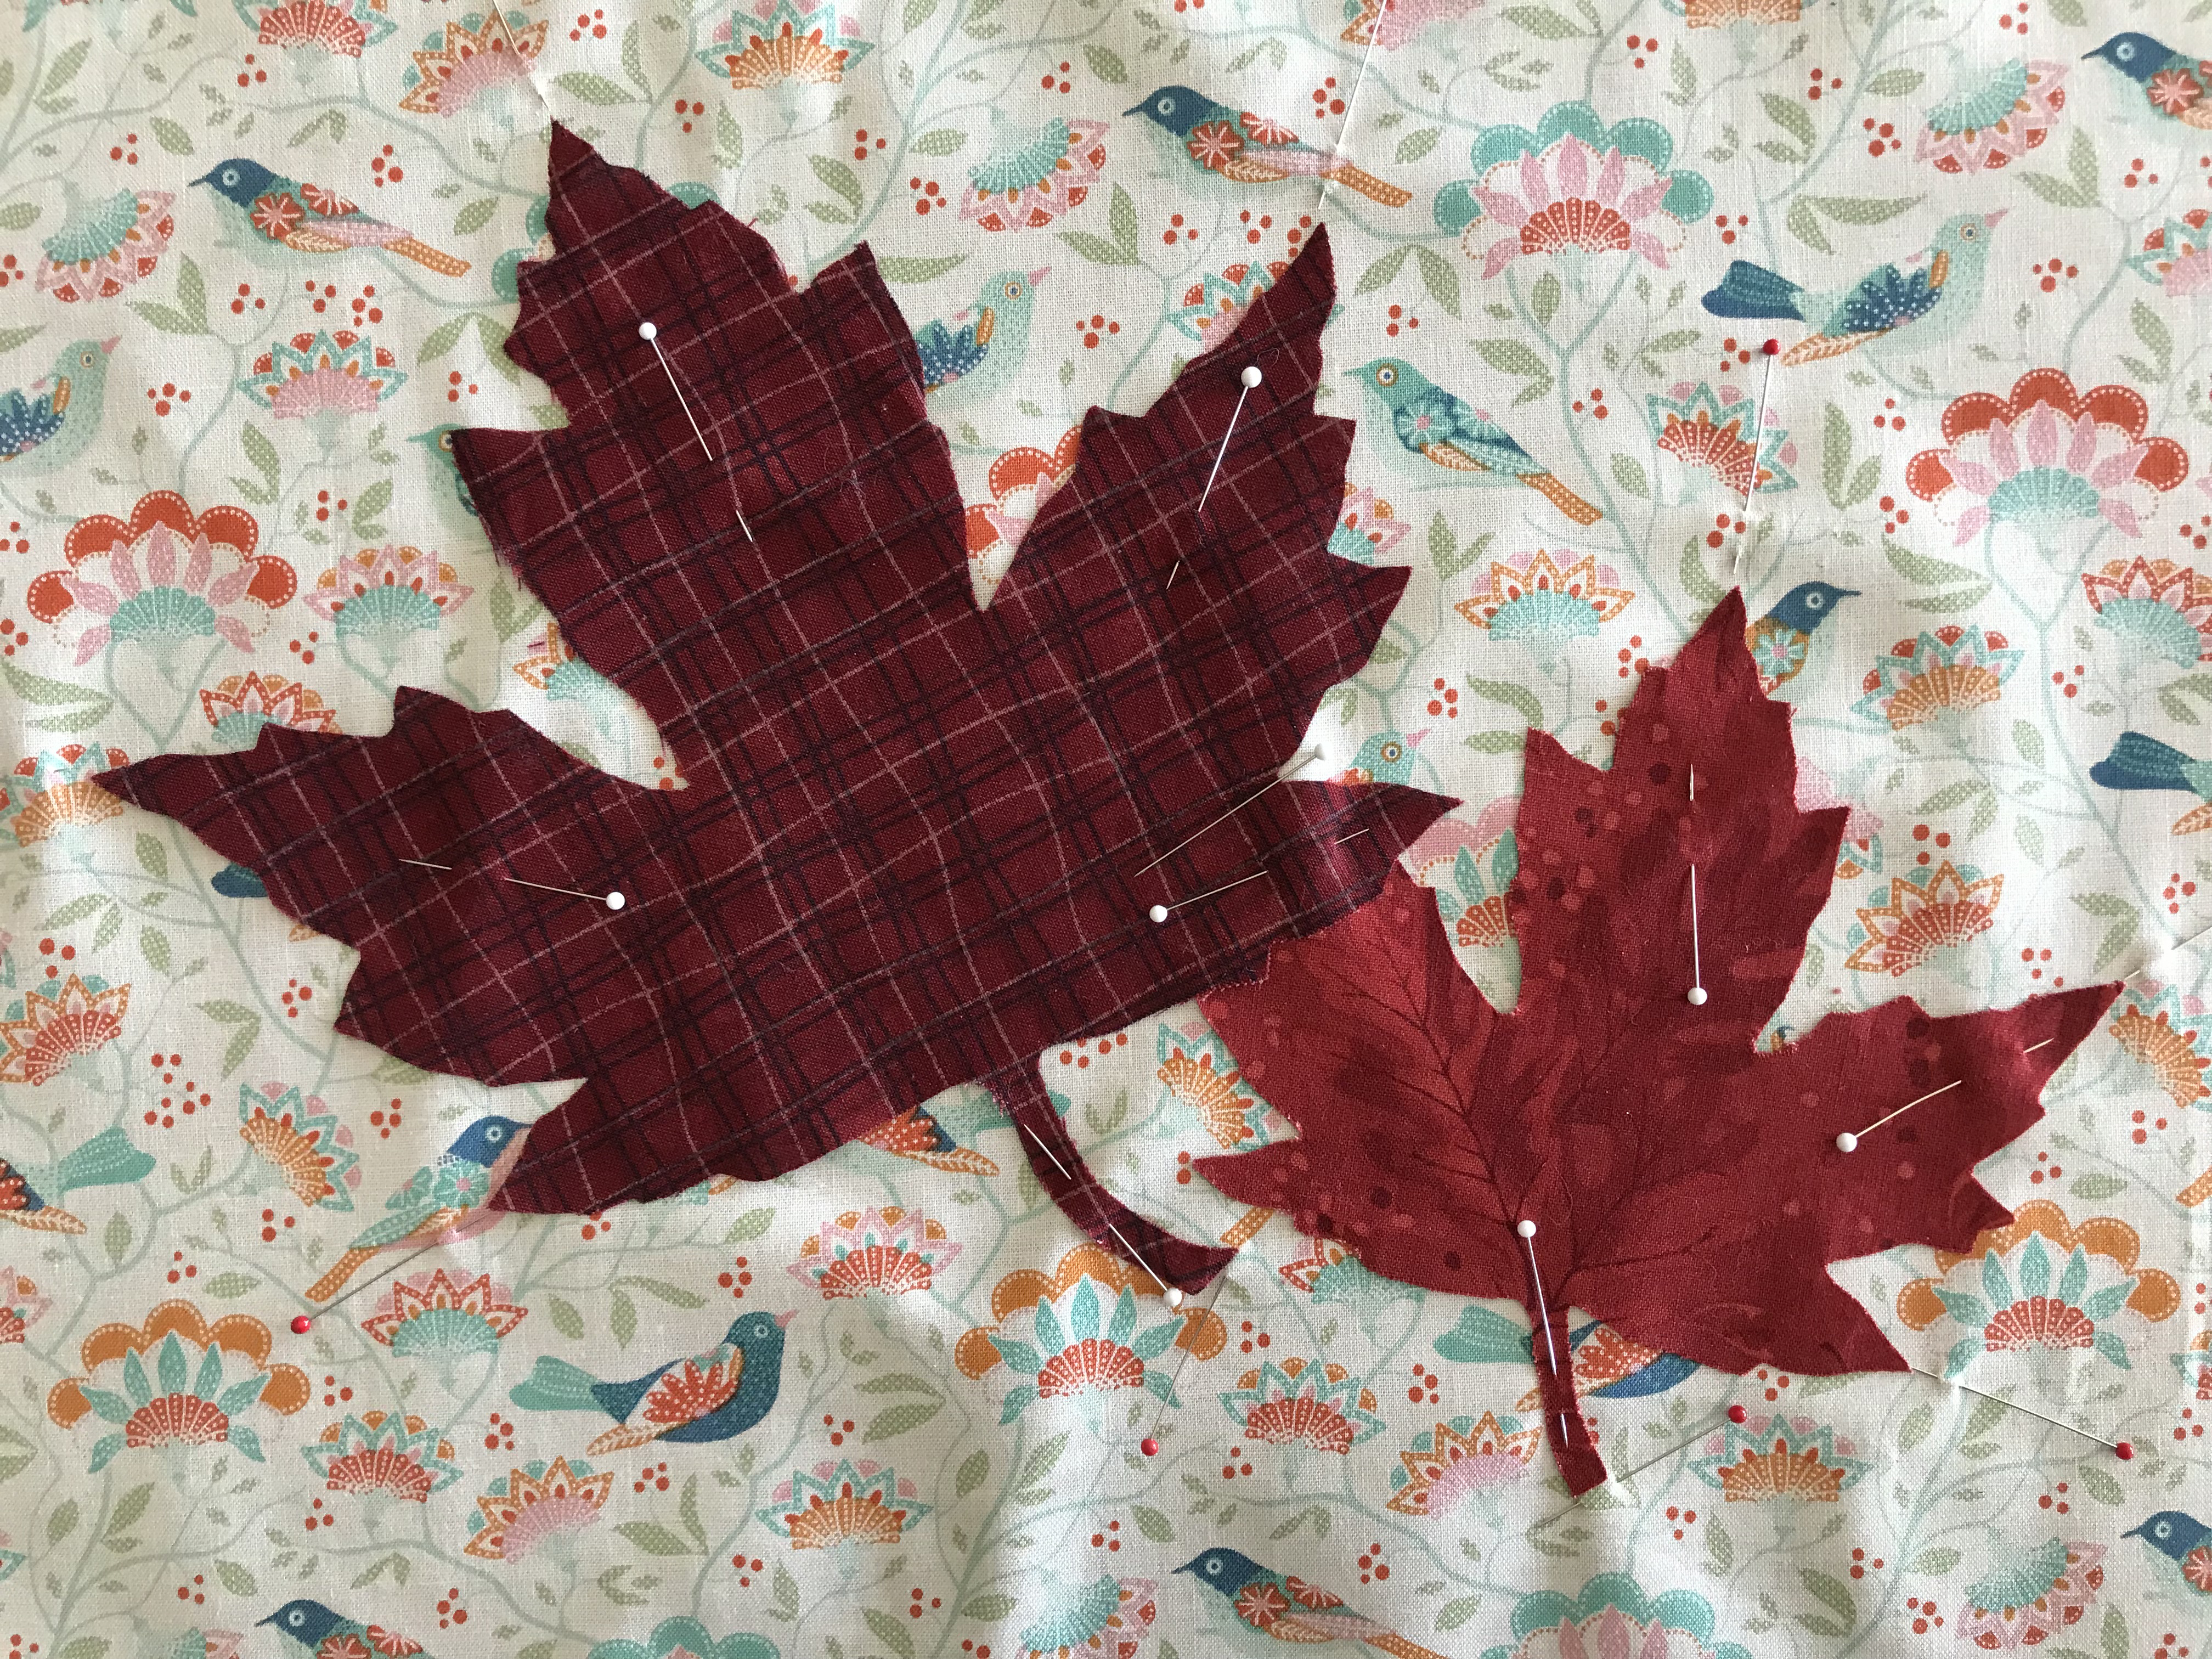 position the cut Maple leaf